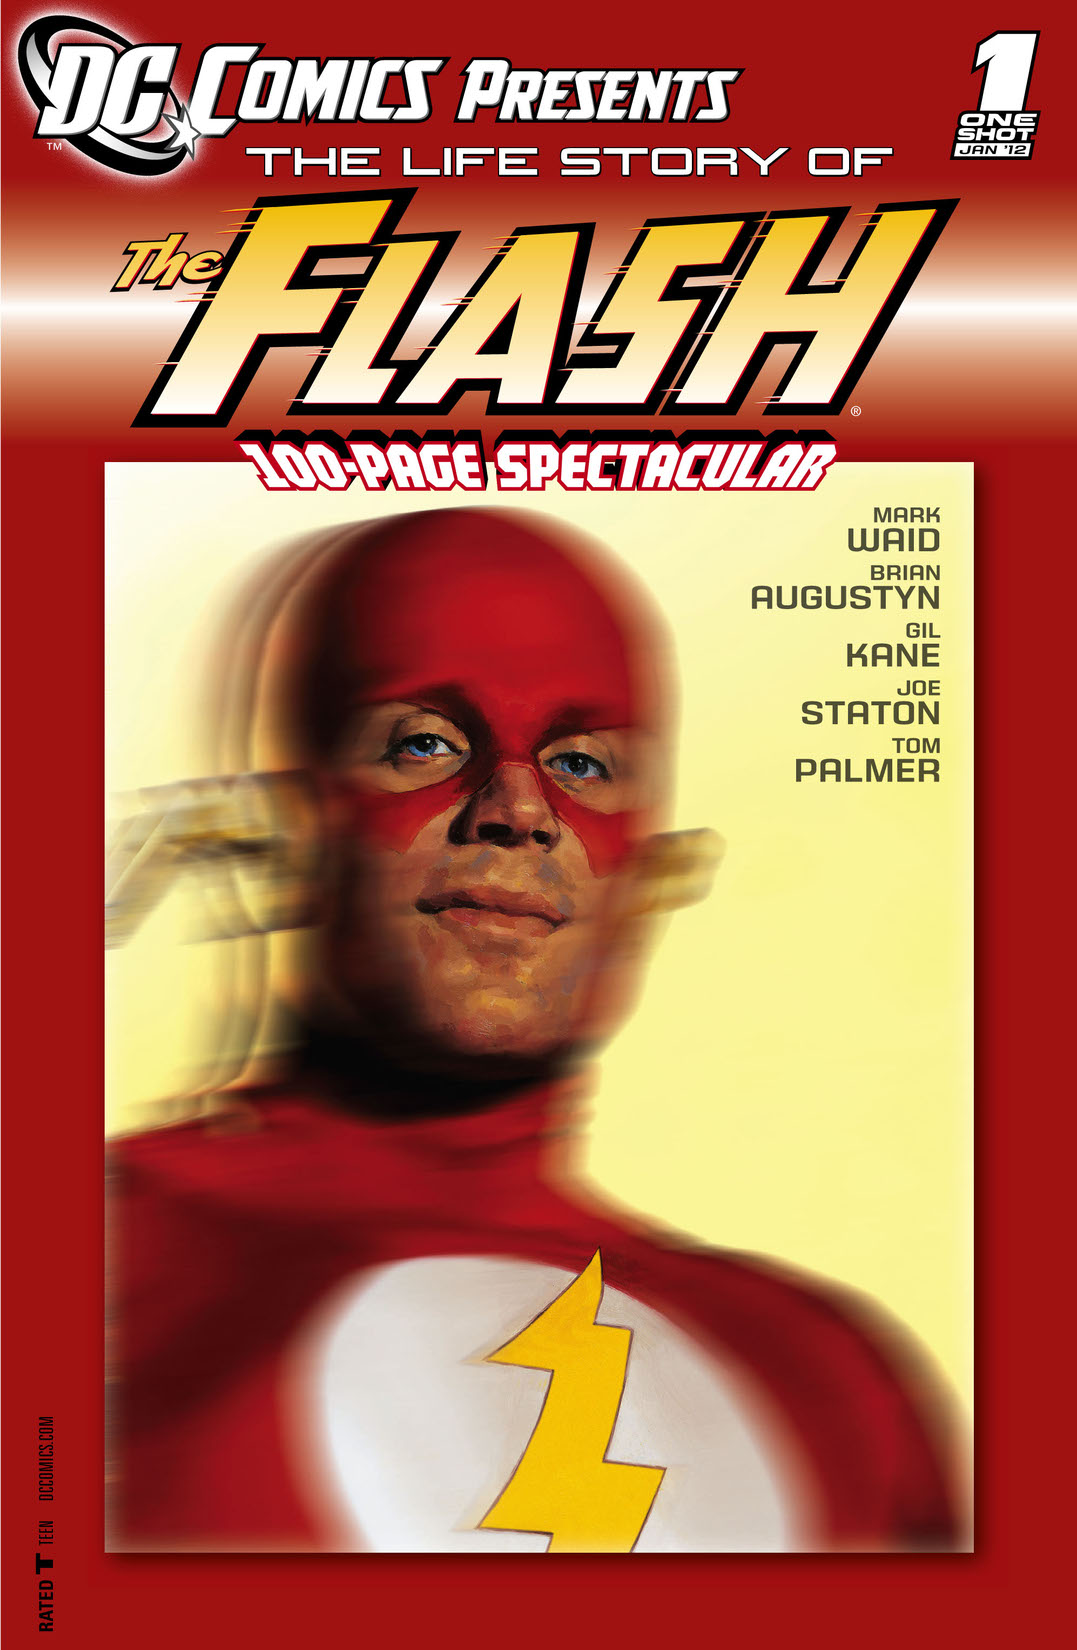 DC Comics Presents: Life Story of the Flash (2011-) #1 preview images